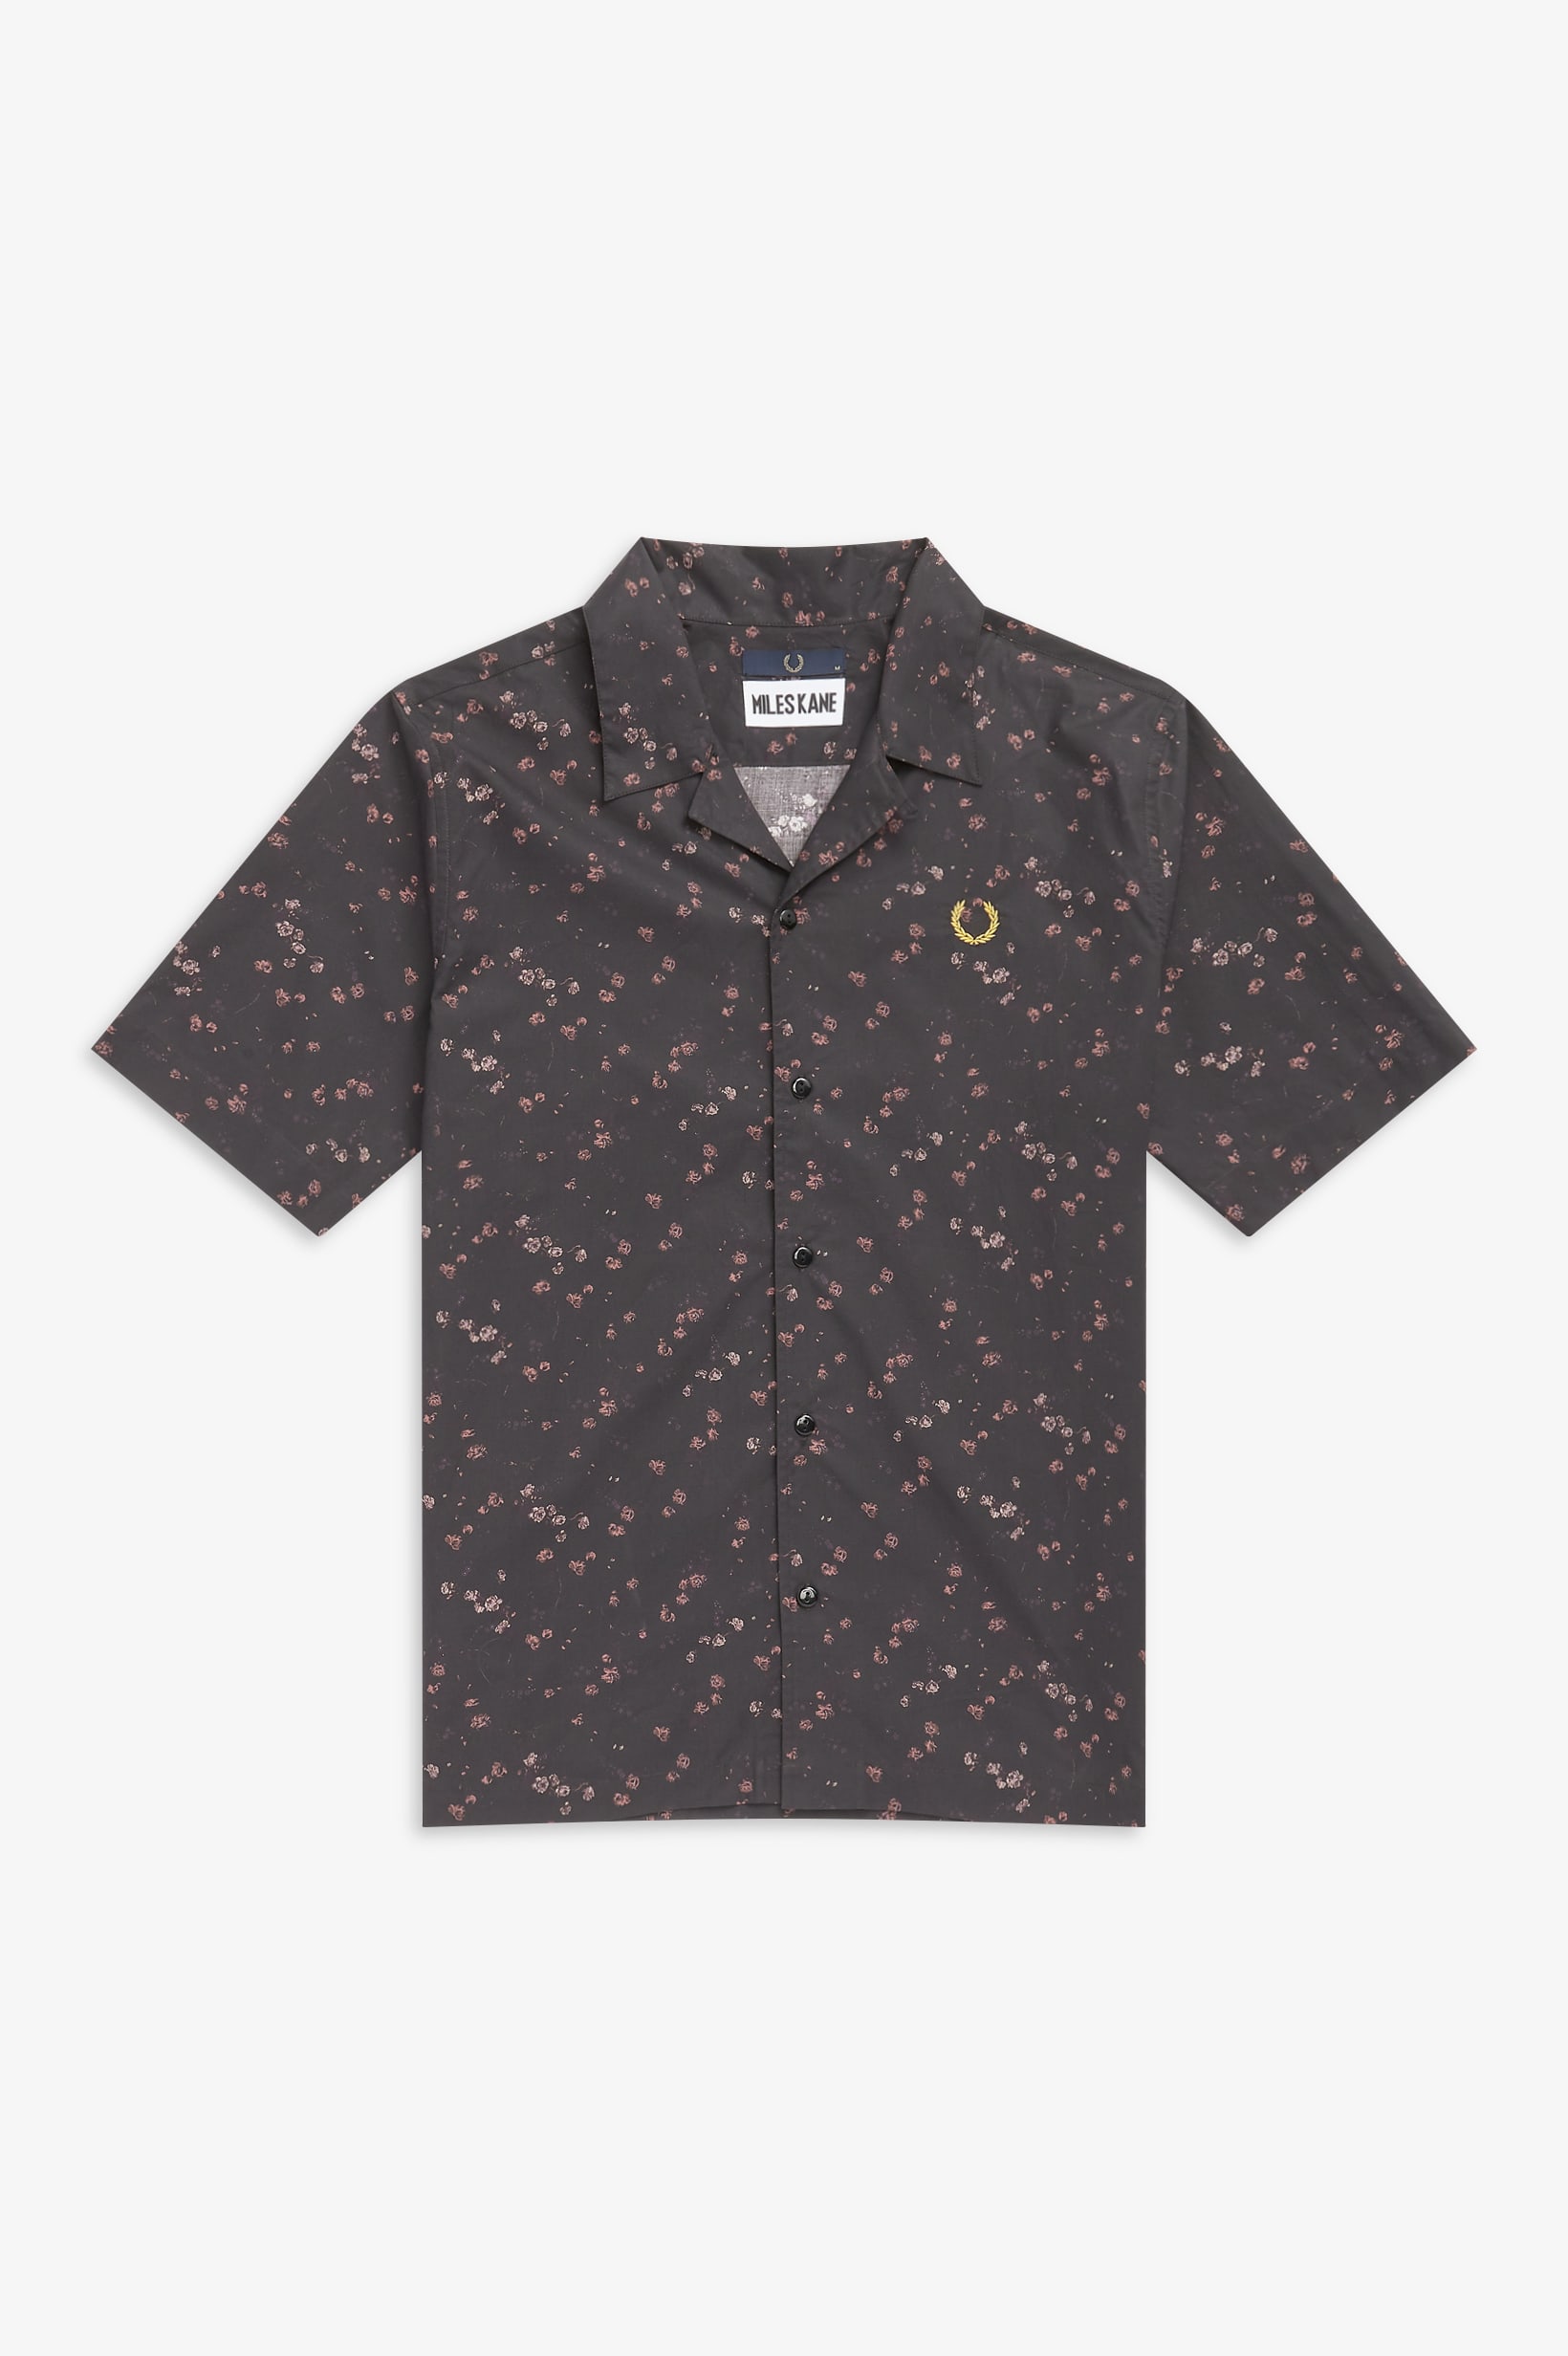 fred-perry-miles-kane-19-4